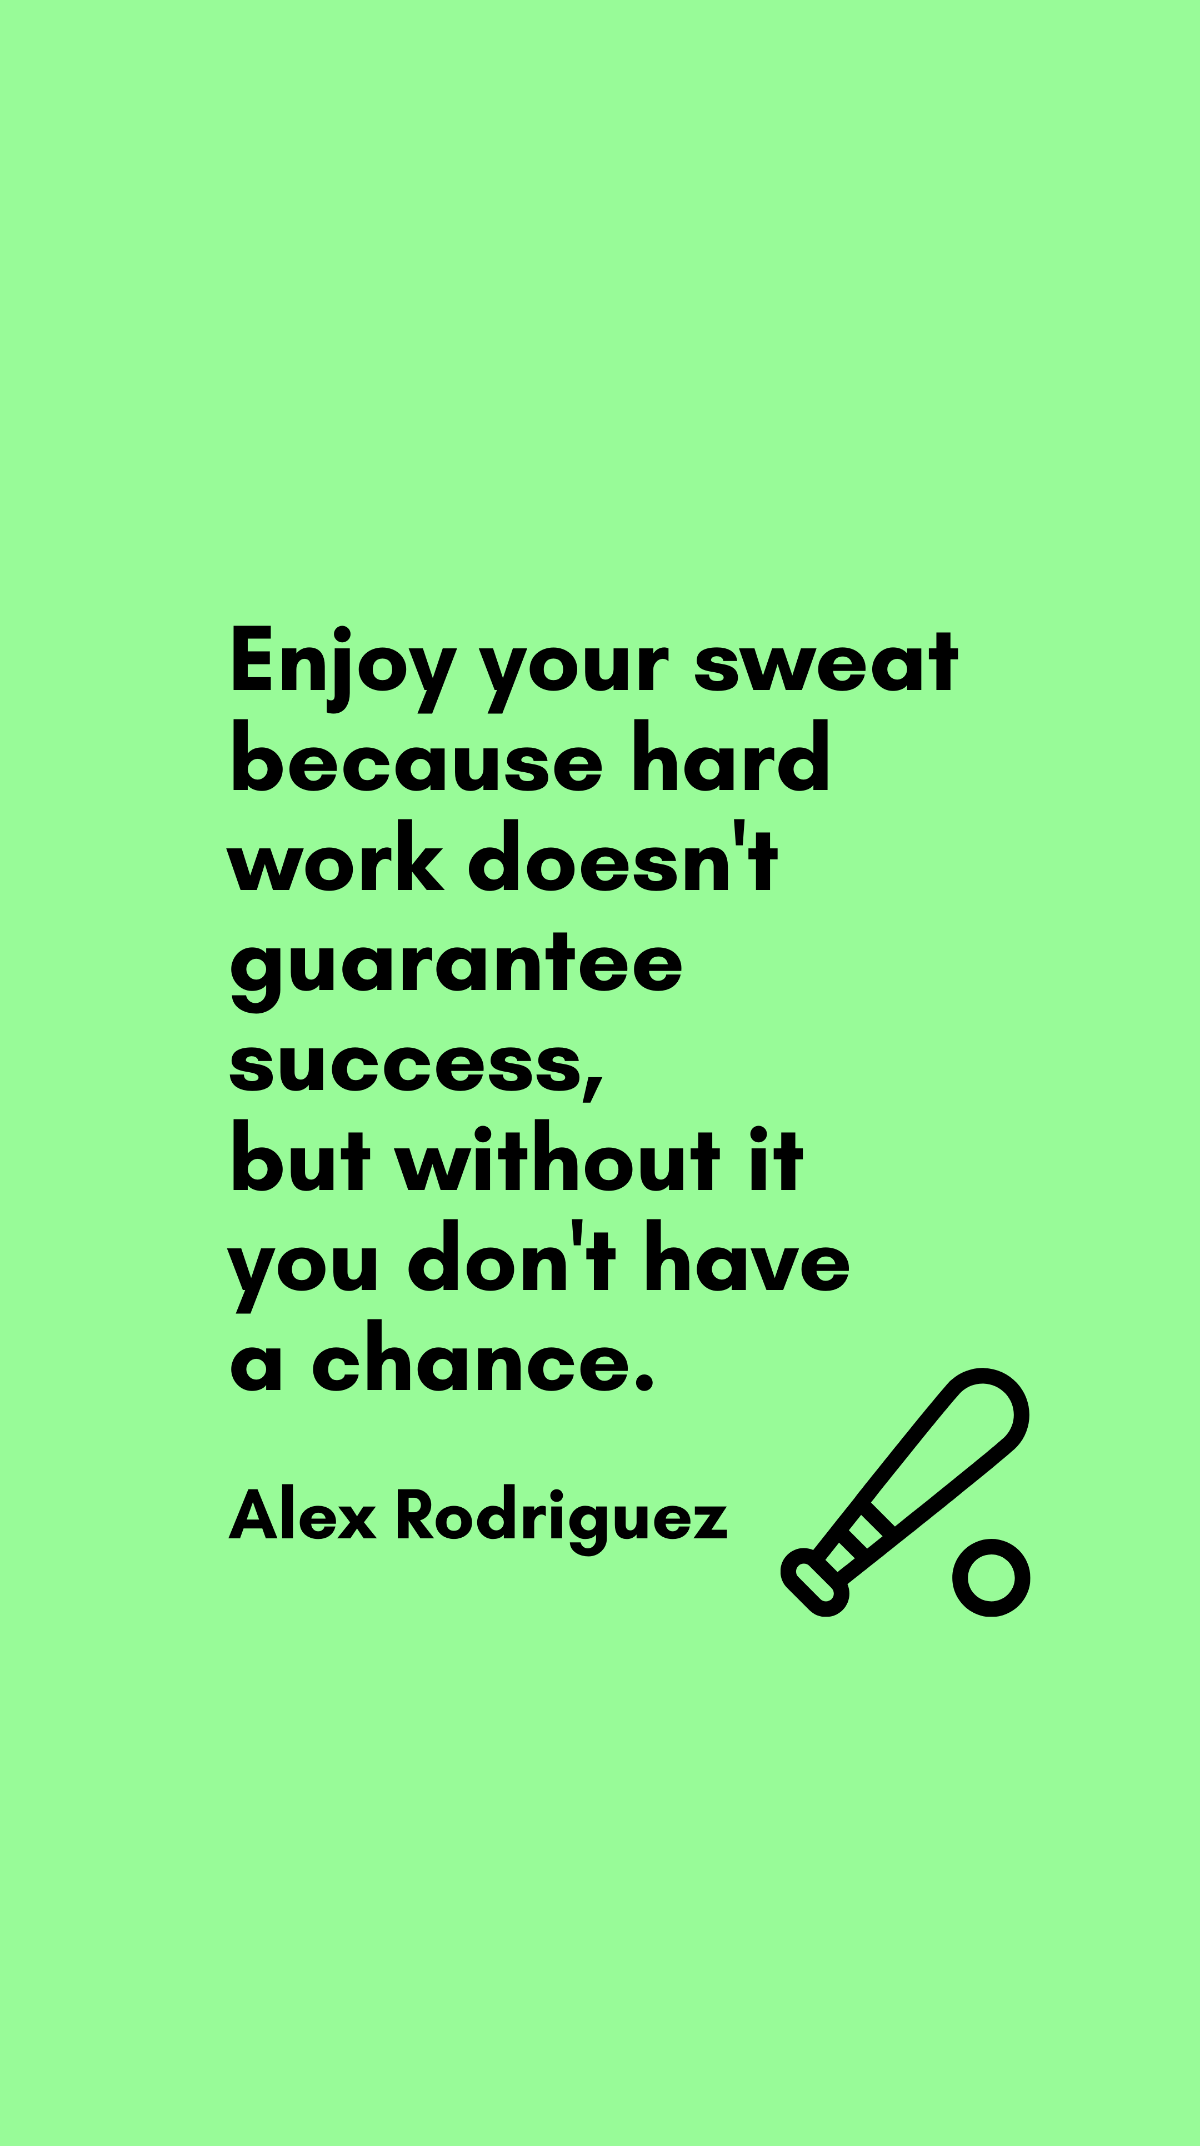 Alex Rodriguez - Enjoy your sweat because hard work doesn't guarantee success, but without it you don't have a chance. Template